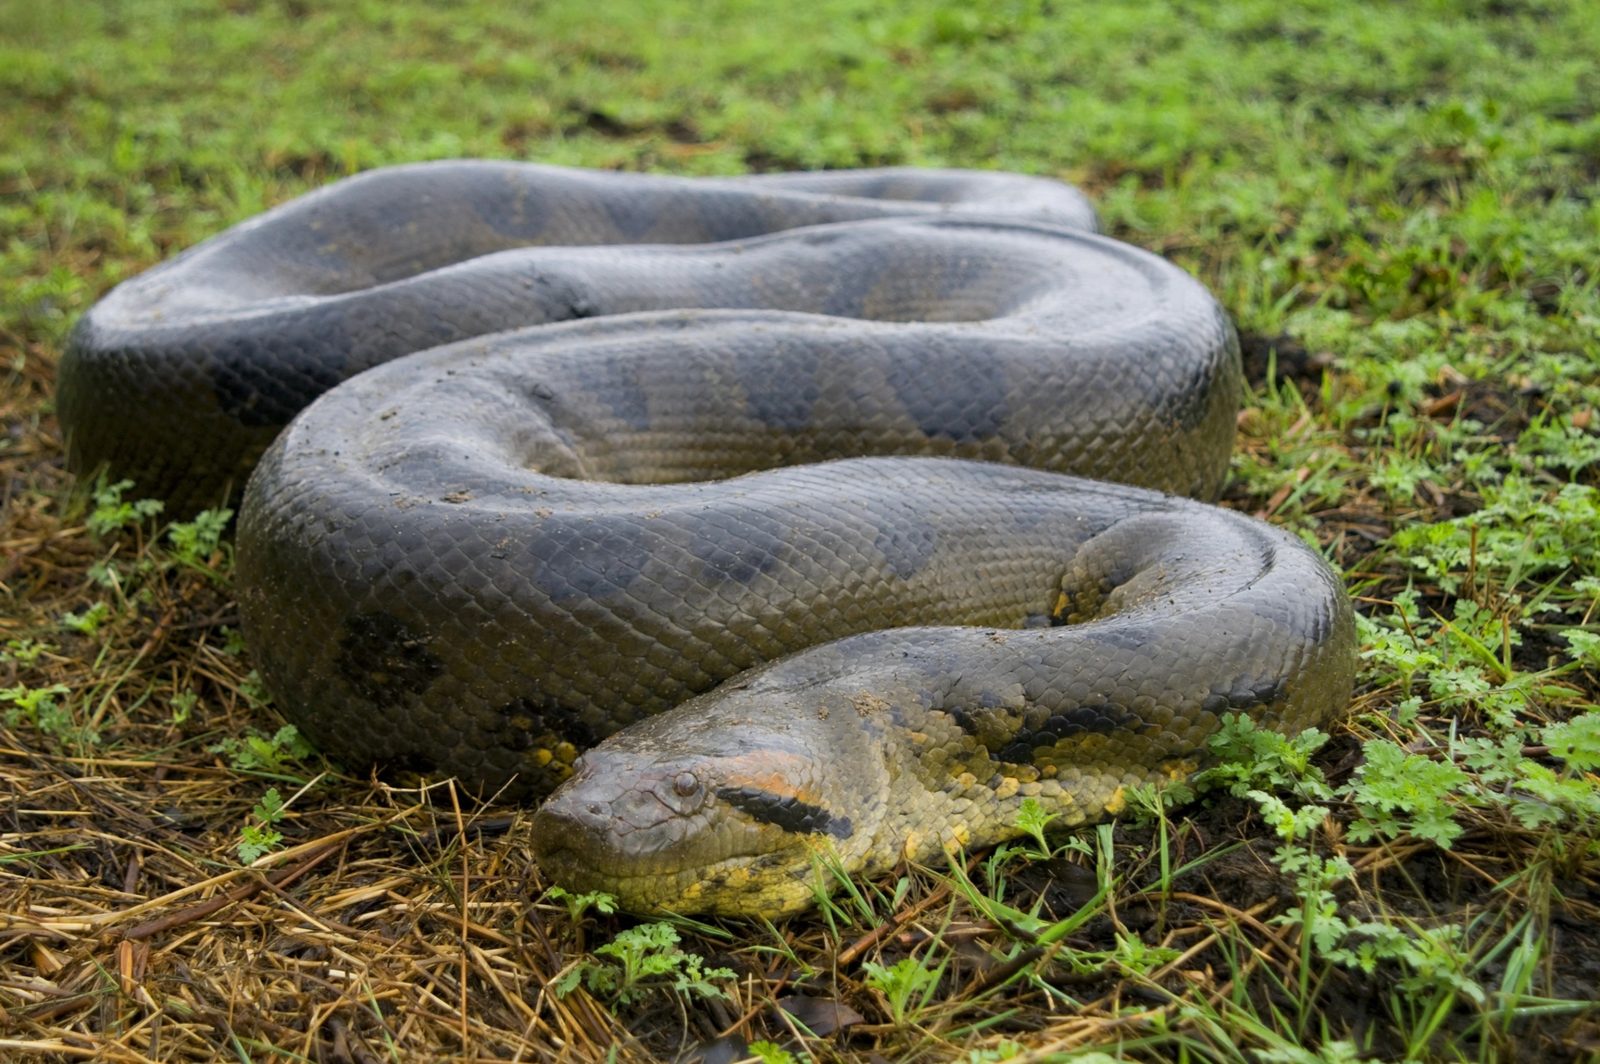 Stop Everything and See If You Can Ace This 24-Question General Knowledge Quiz Green Anaconda